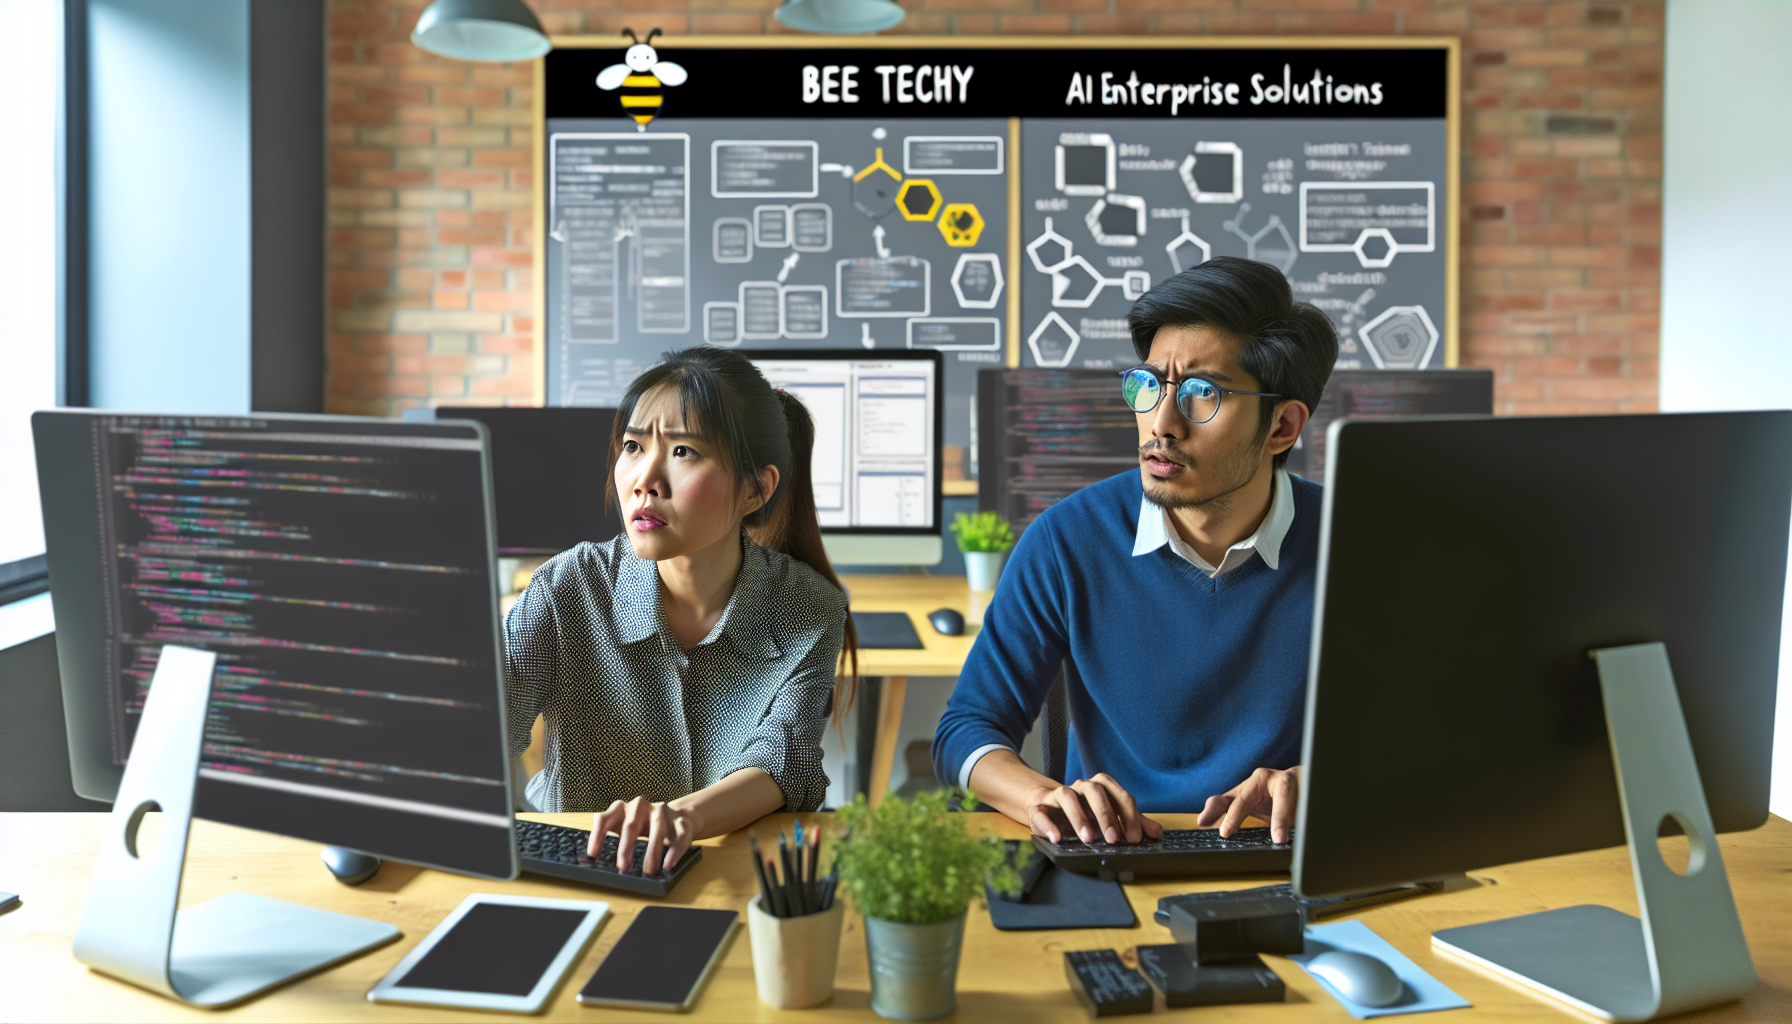 Bee Techy team working on AI enterprise solutions